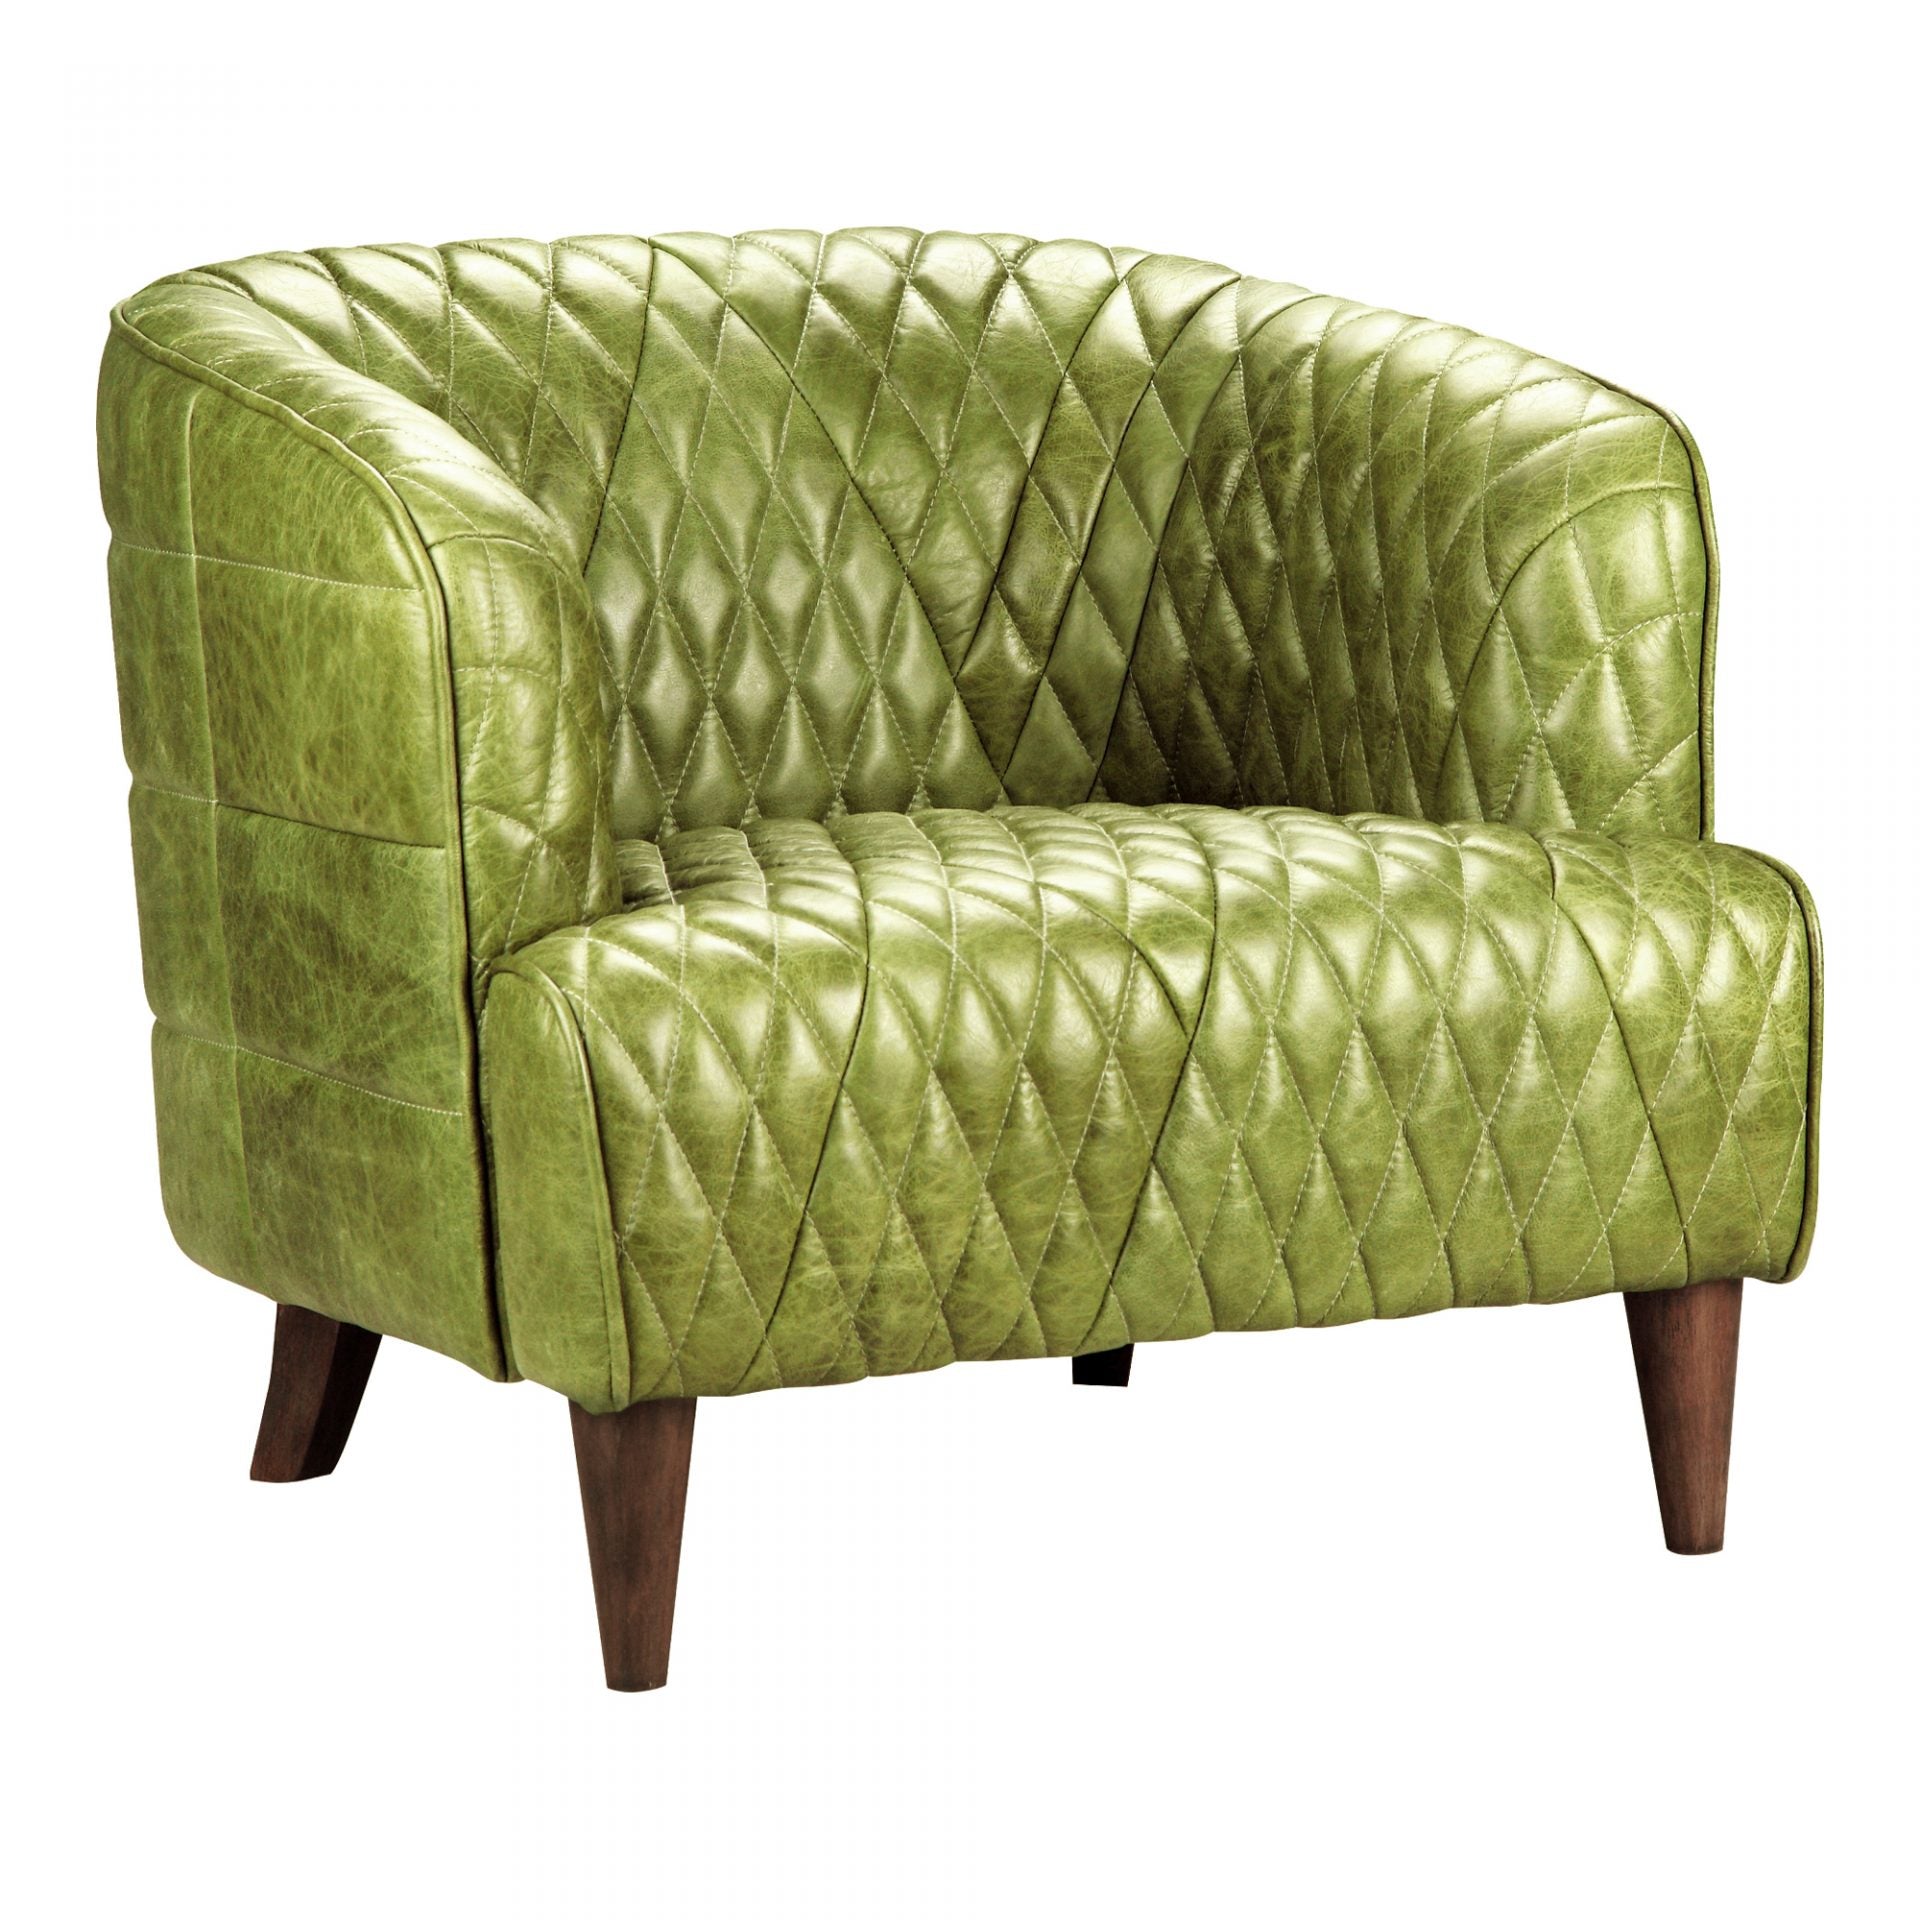 Magdelan Tufted Leather Arm Chair